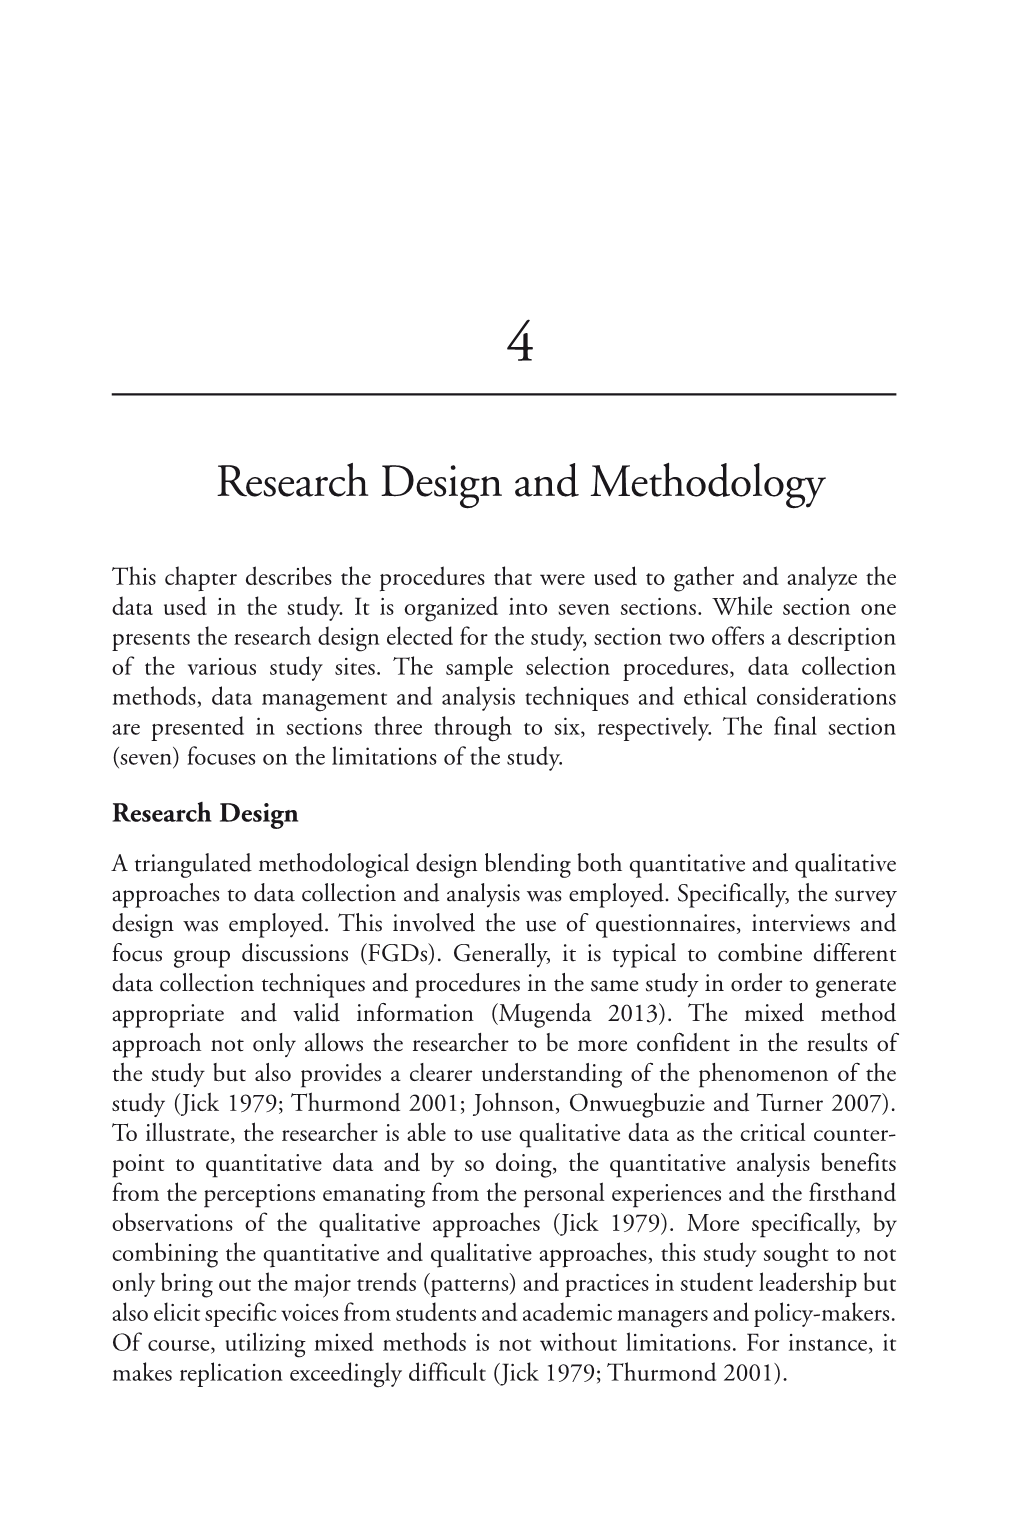 Research Design and Methodology